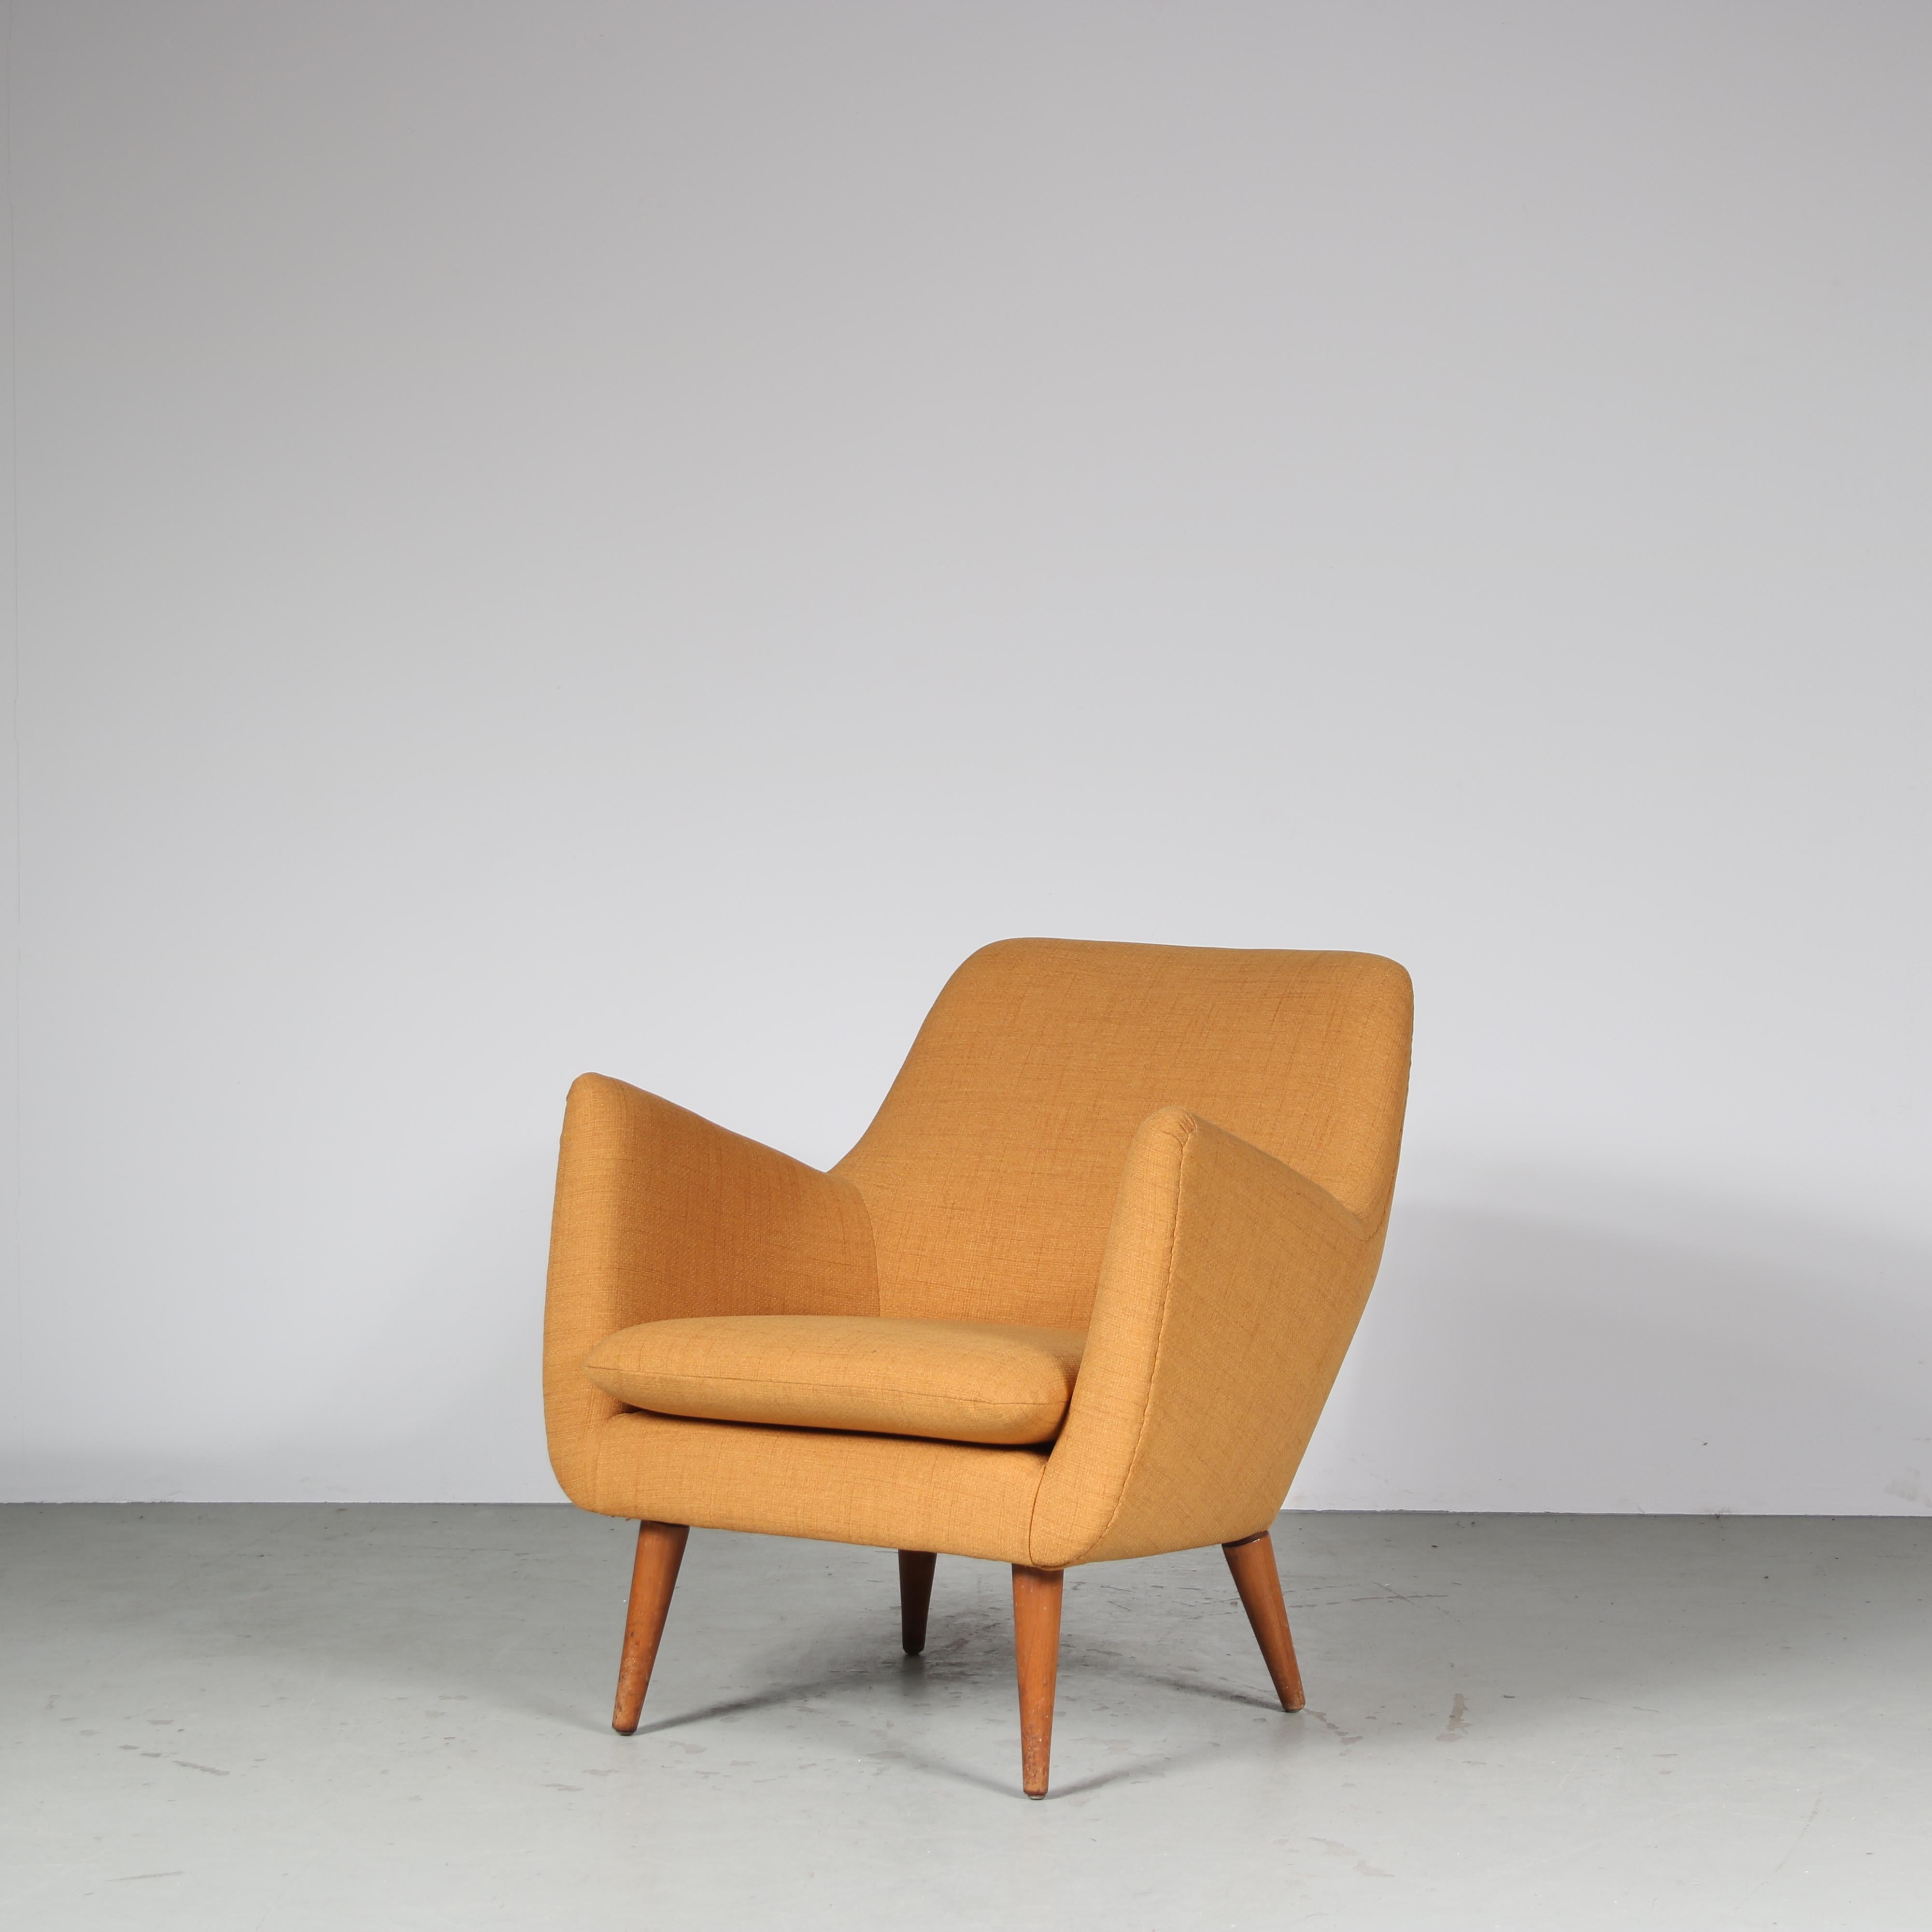 A stunning lounge chair model “Poet”, designed by Finn Juhl and manufactured by Niels Vodder in Denmark around 1950.

The chair is upholstered in high quality yellow ochre fabric, a beautiful material that creates an inviting appearance that works